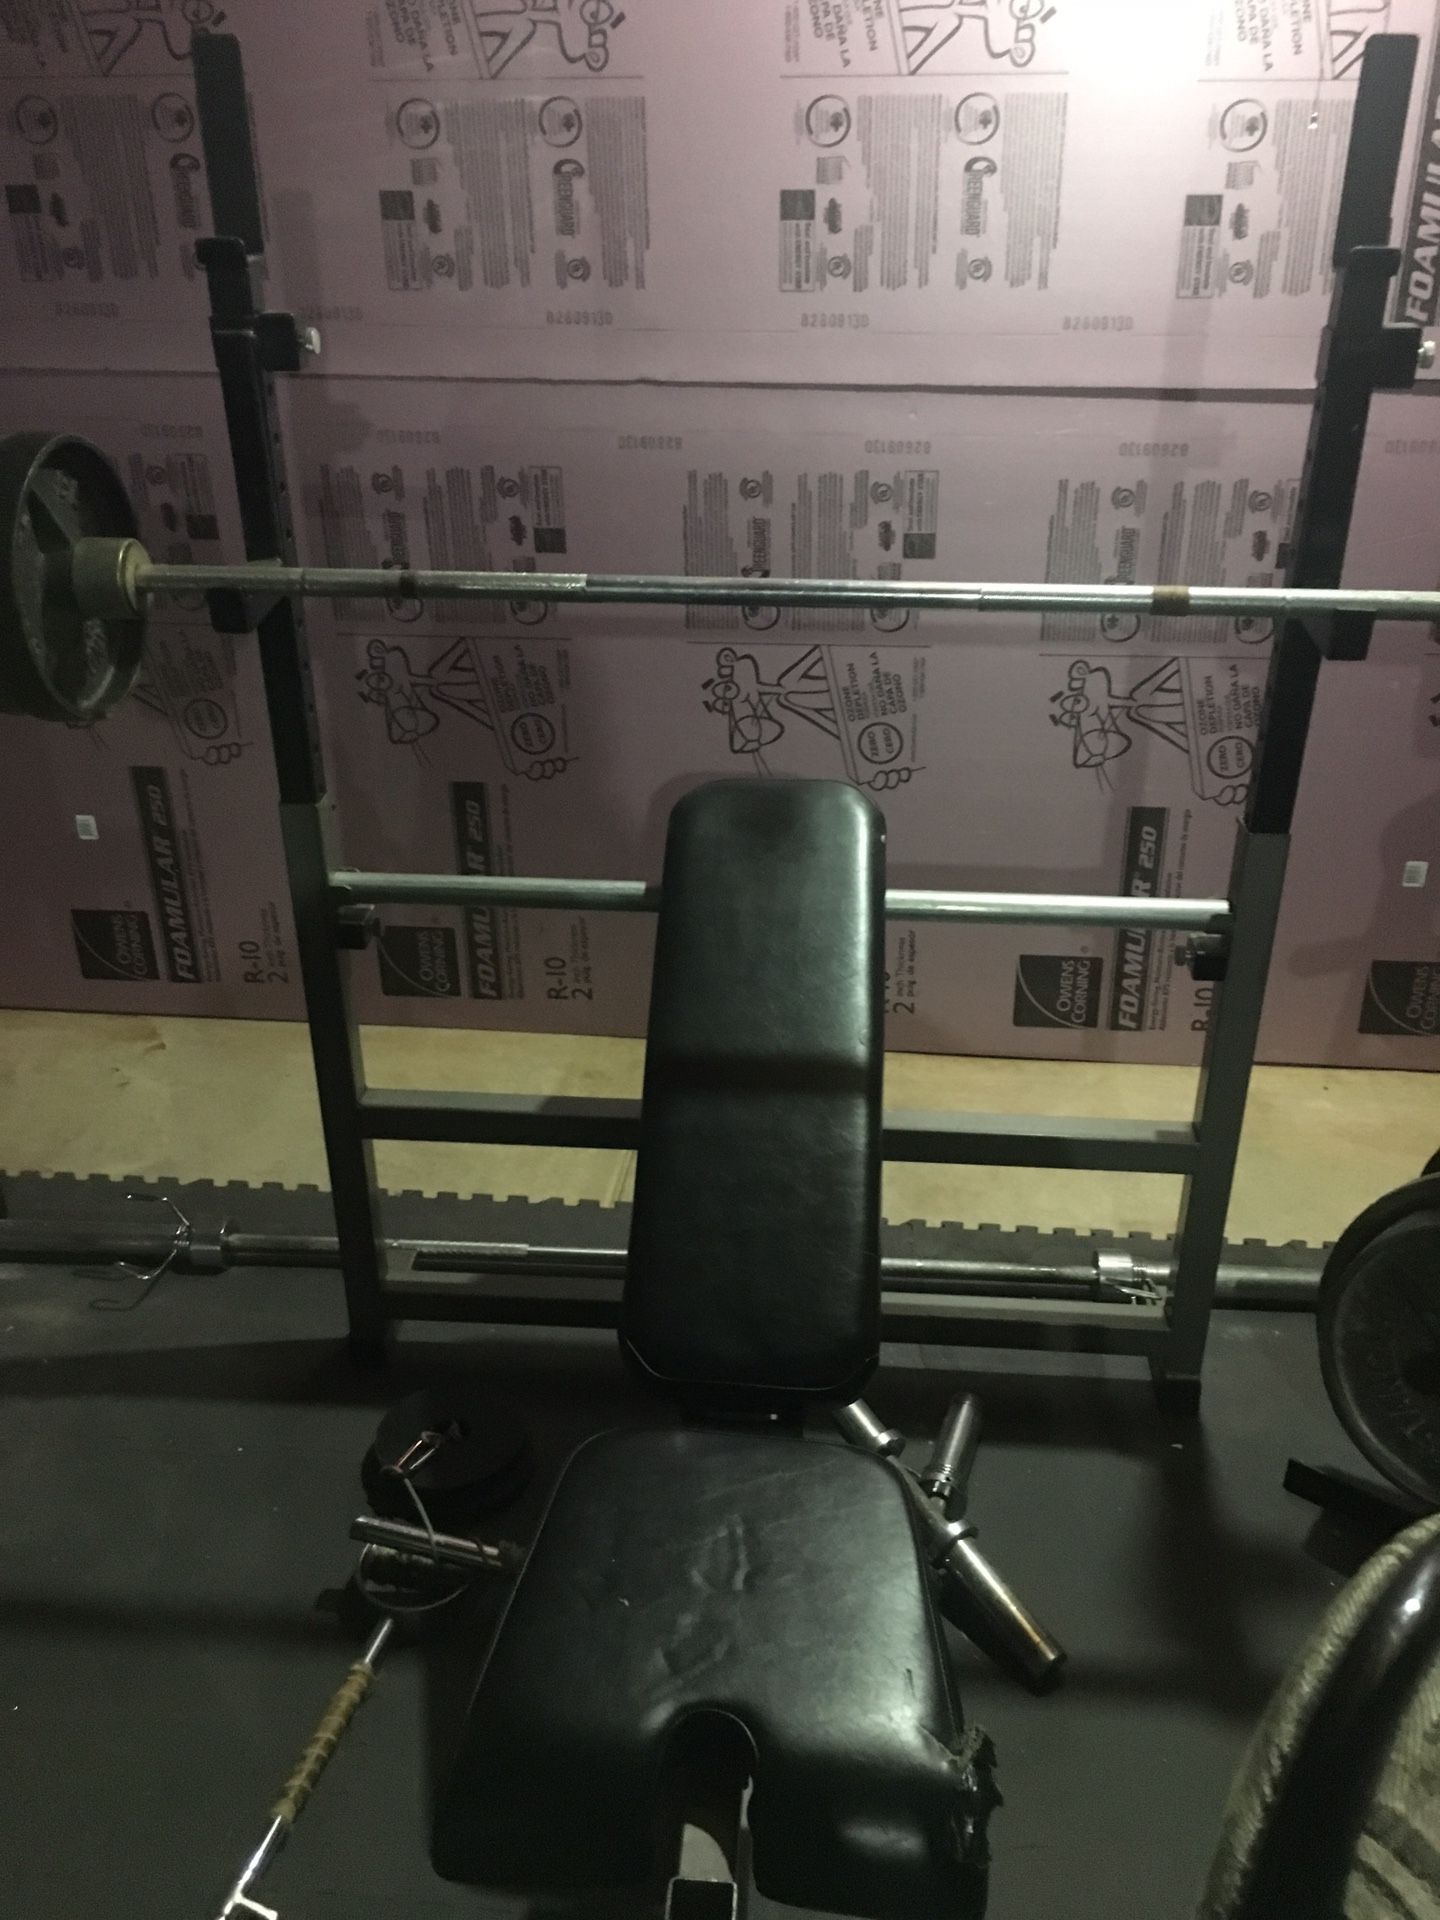 Weight lifting Bench, Preacher Curl, Lat Pull Down, Plates & Misc